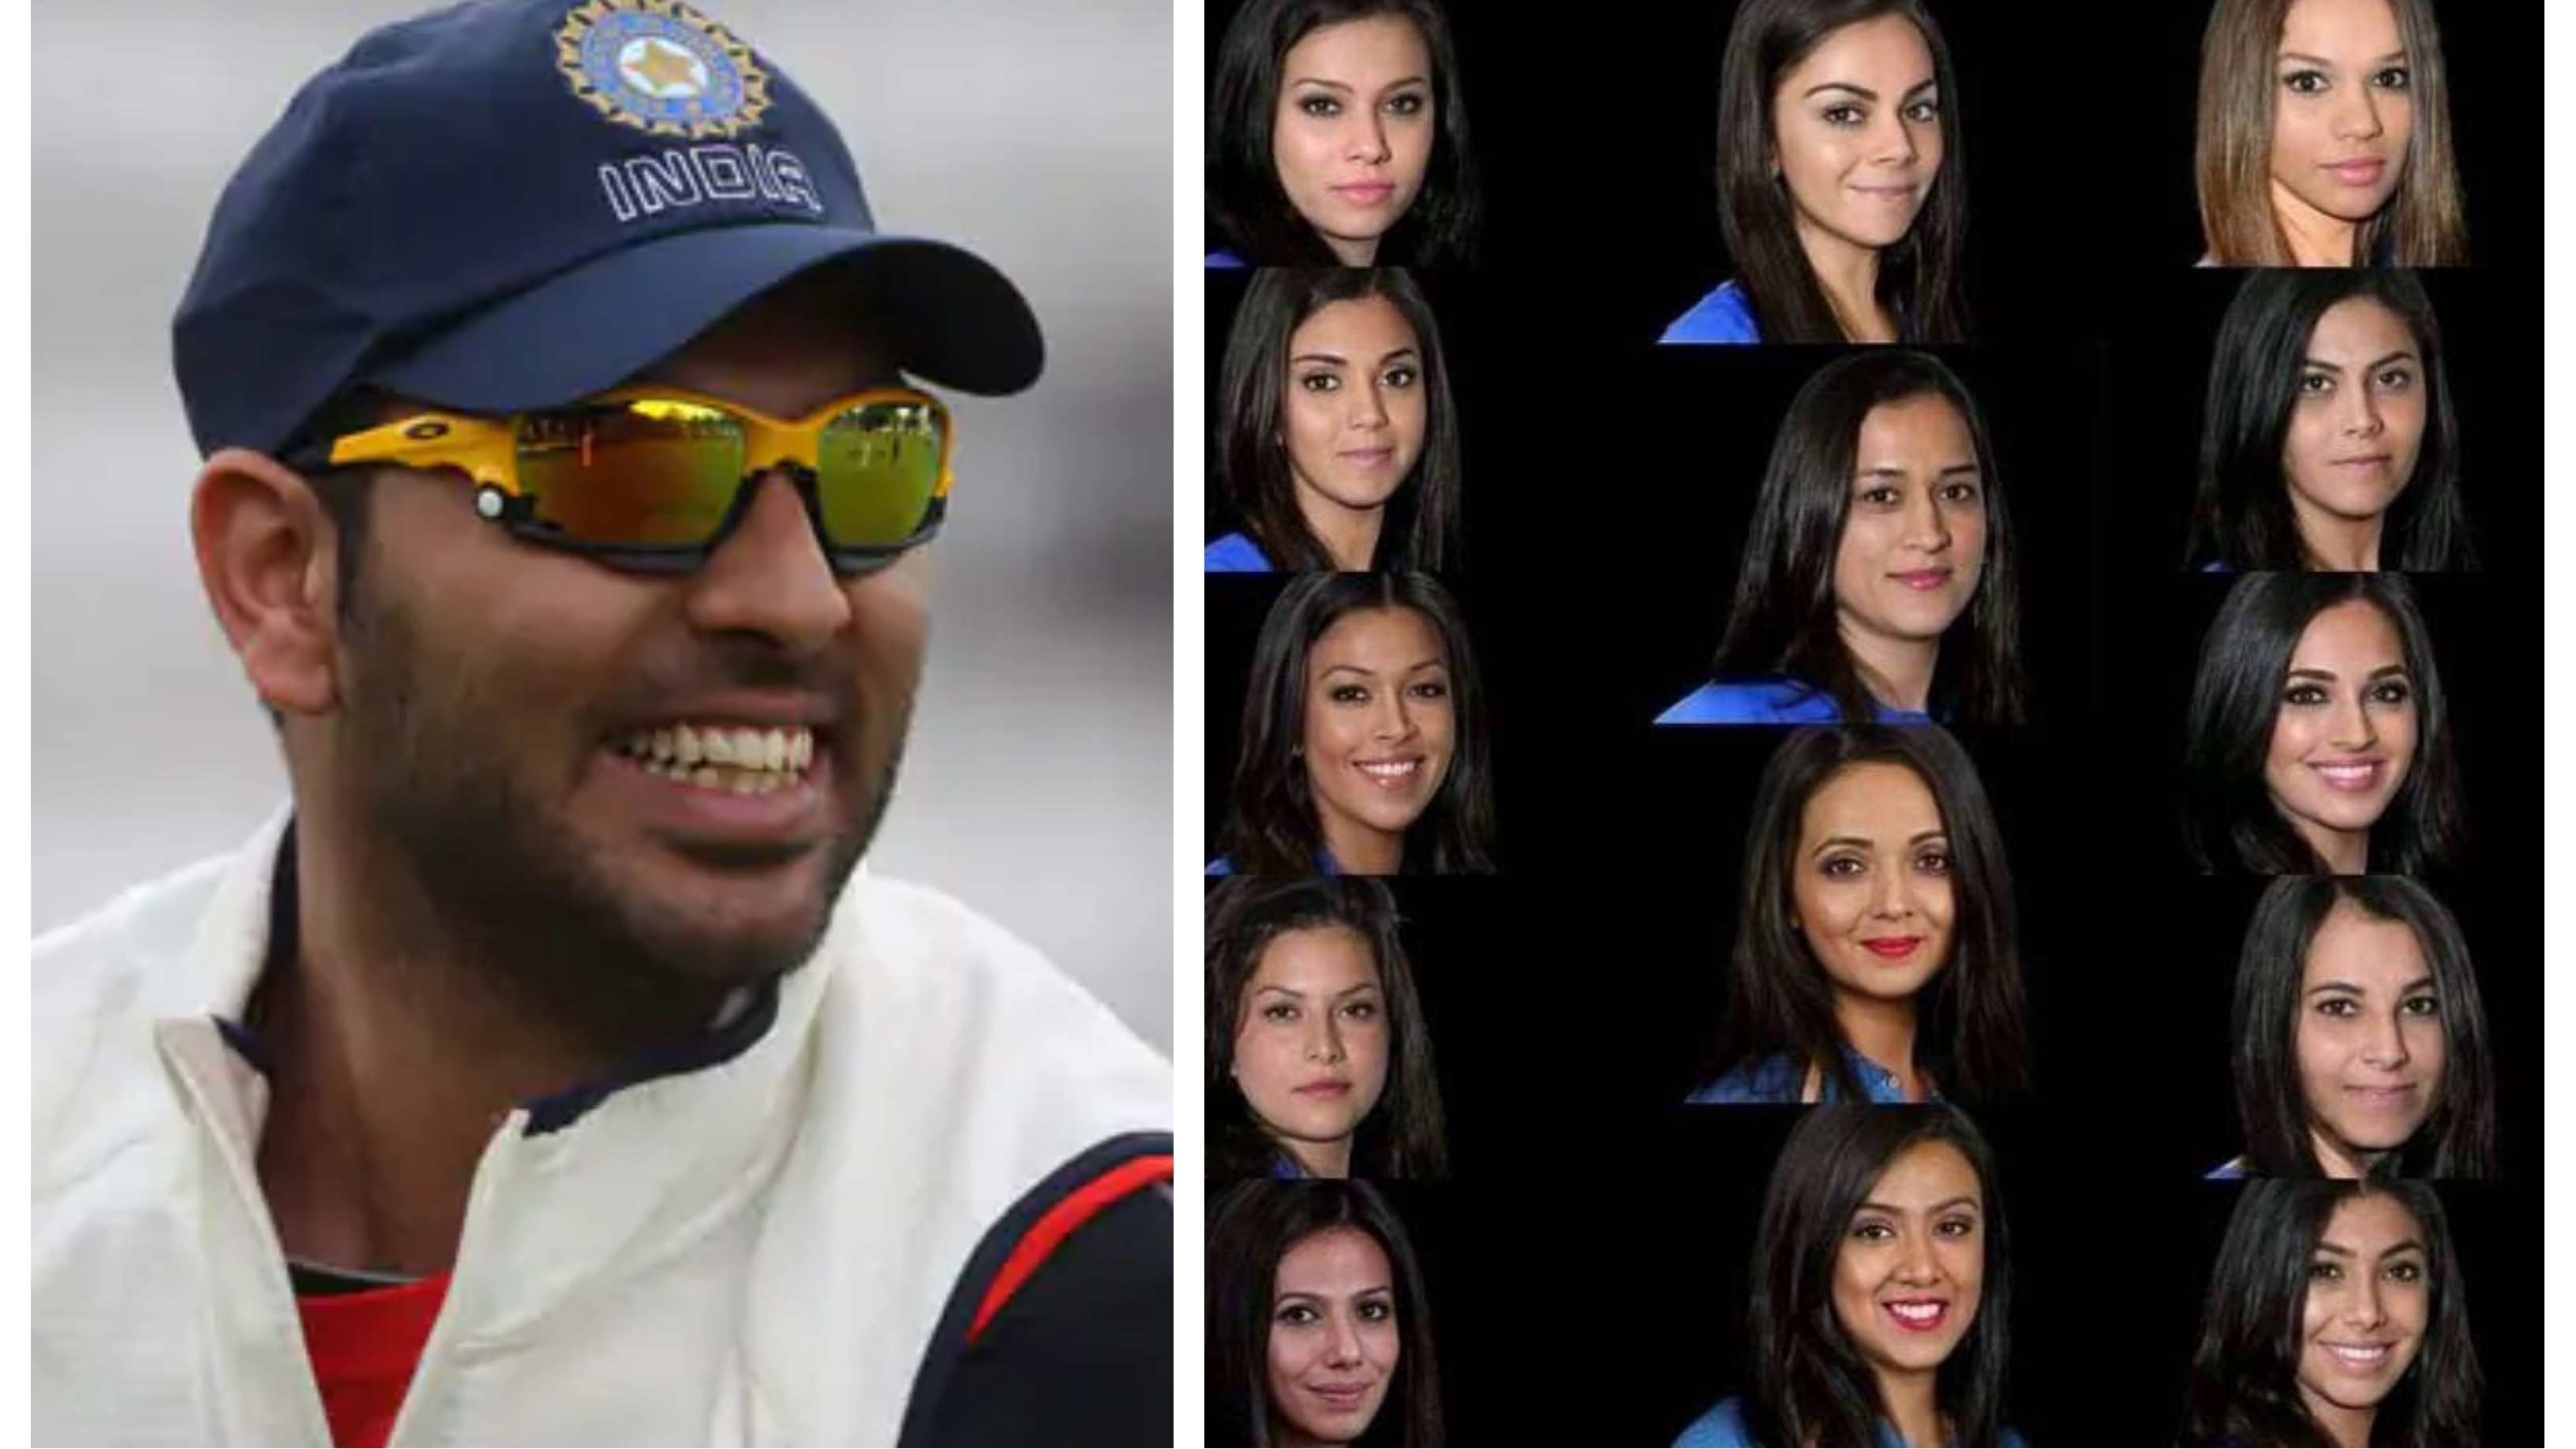 Yuvraj shares a picture of Indian players with long hair; asks netizens ‘who will you select as your girlfriend?’